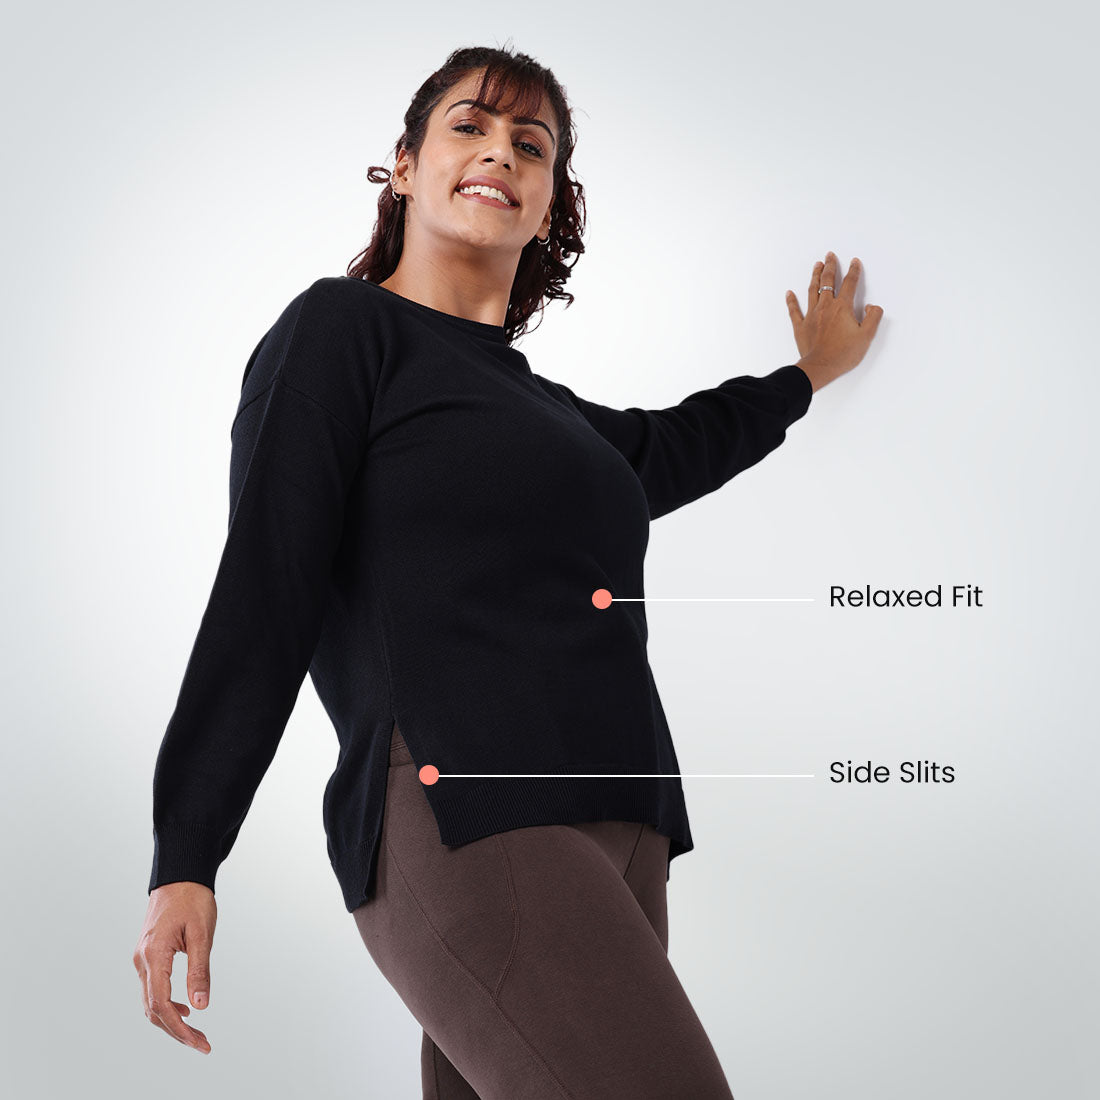 At-Ease CottonKnit Top - Full Sleeves - BlissClub